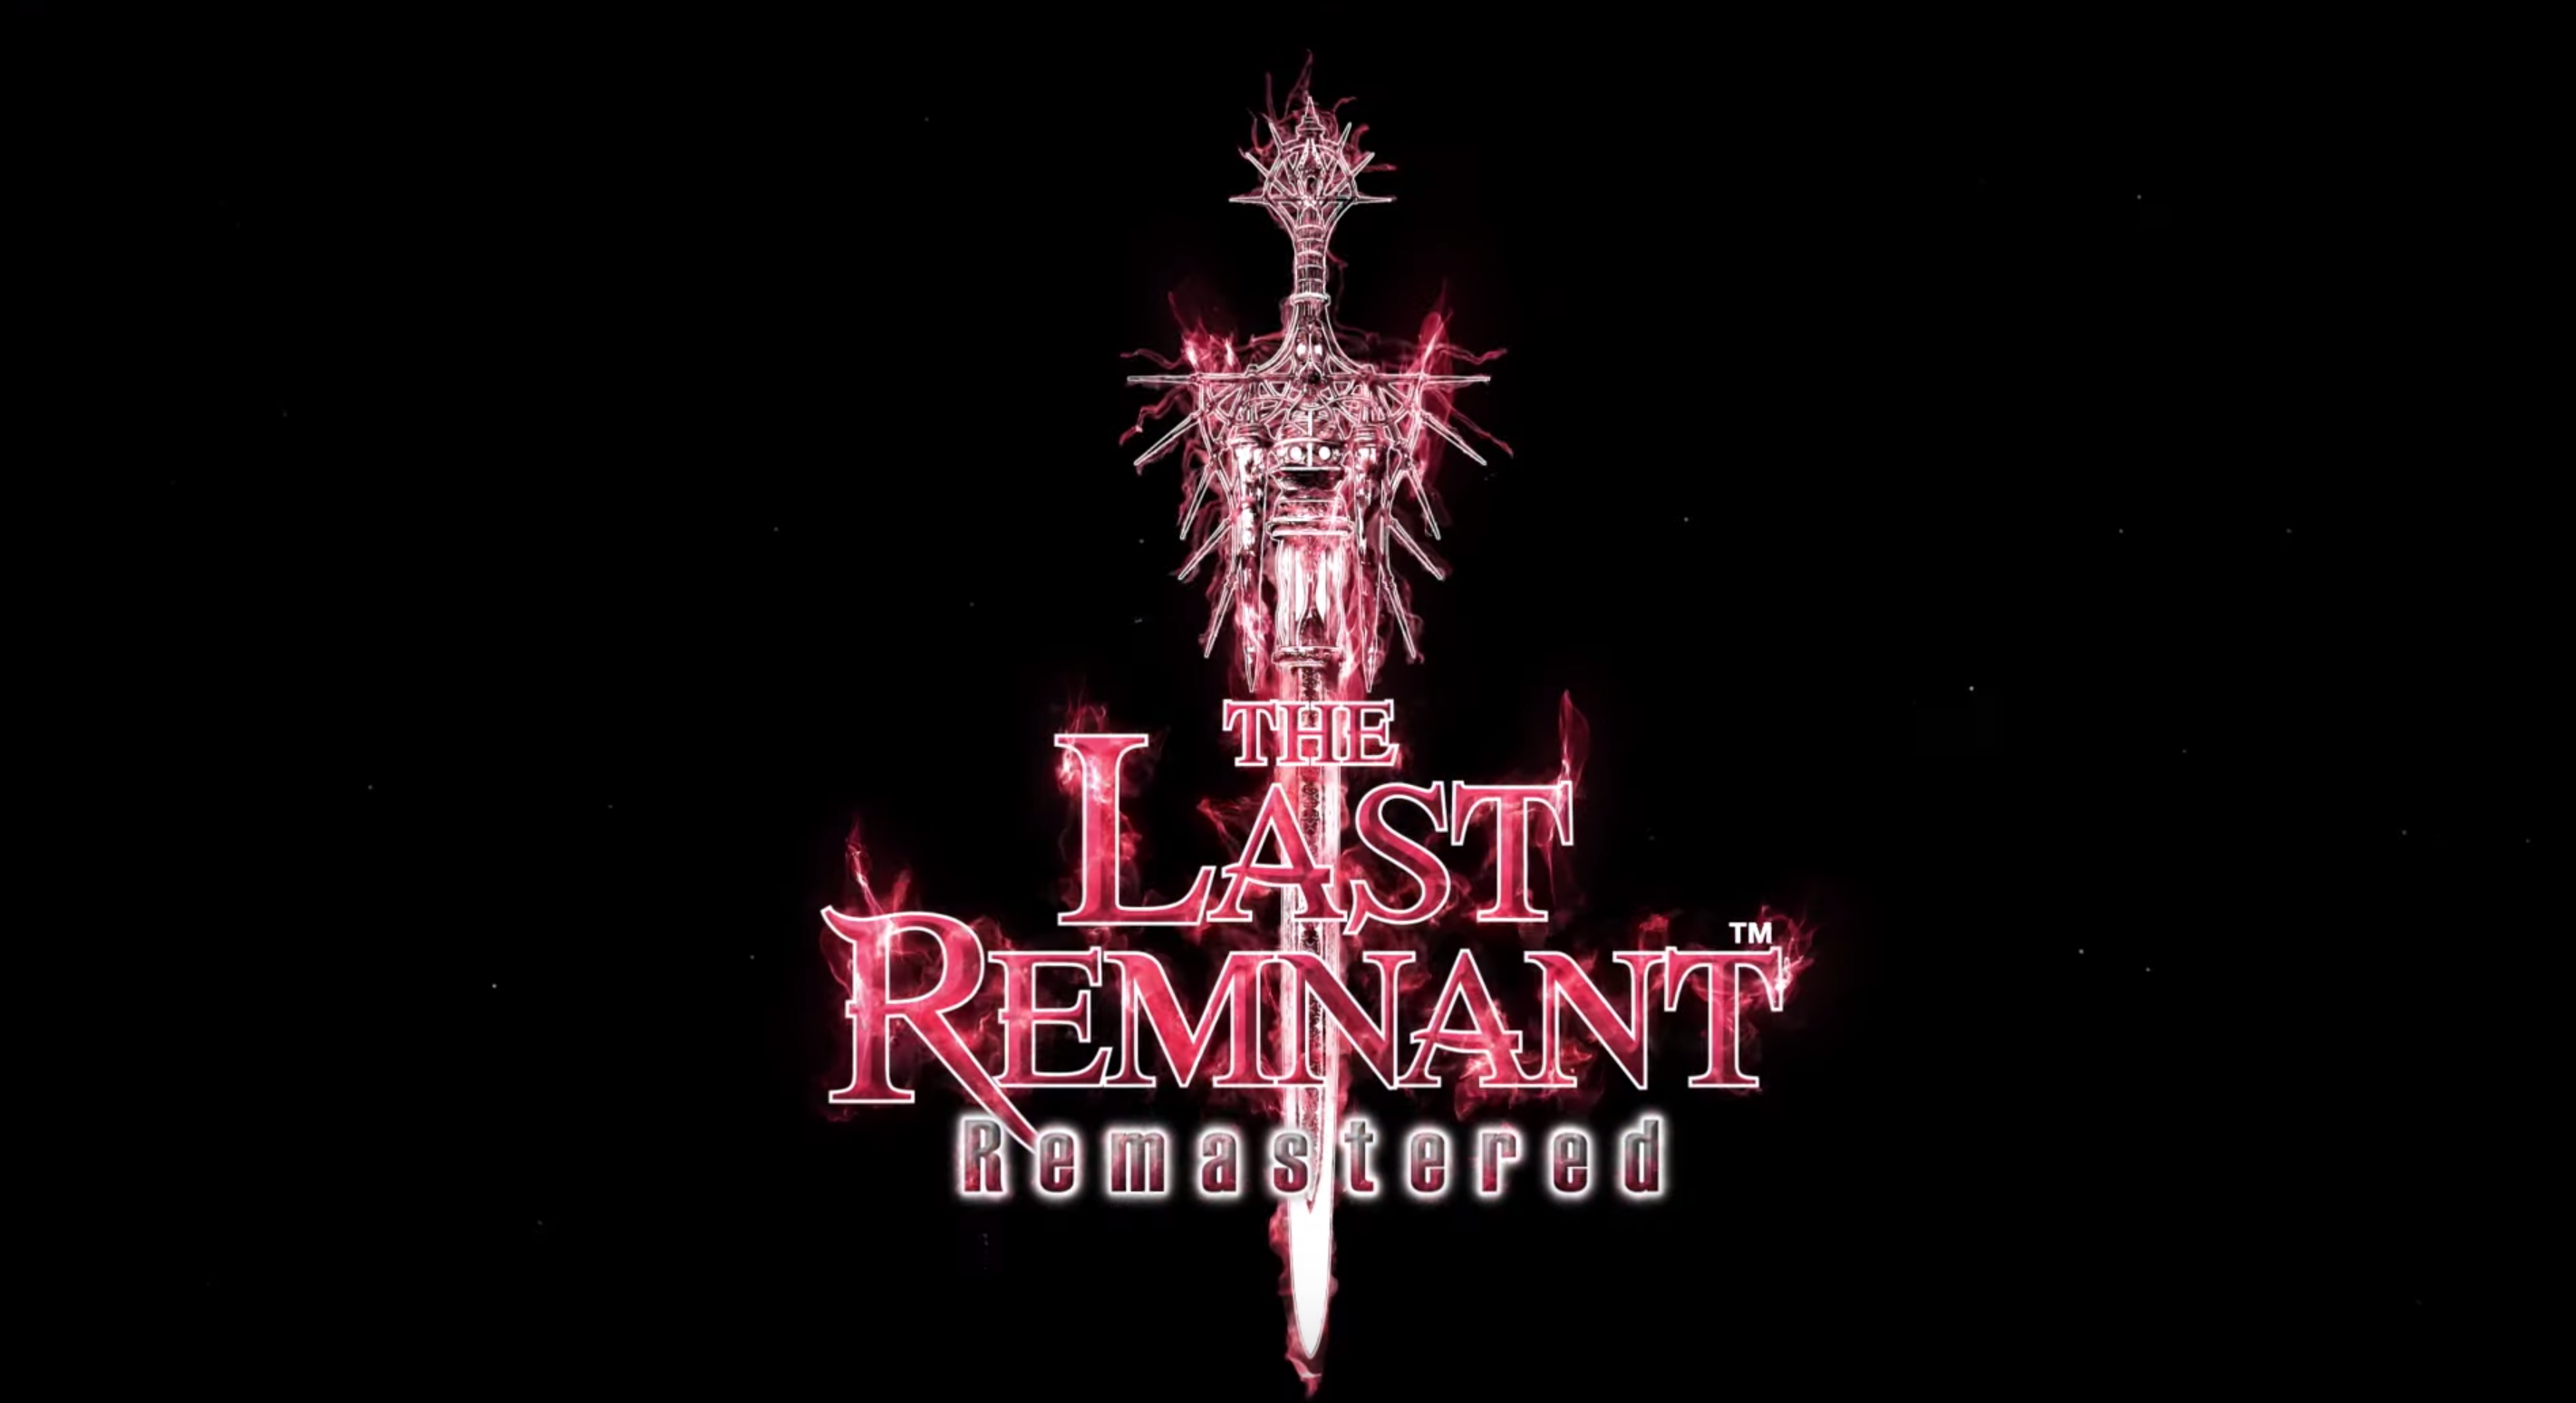 E3: The Last Remnant Remastered comes to Switch